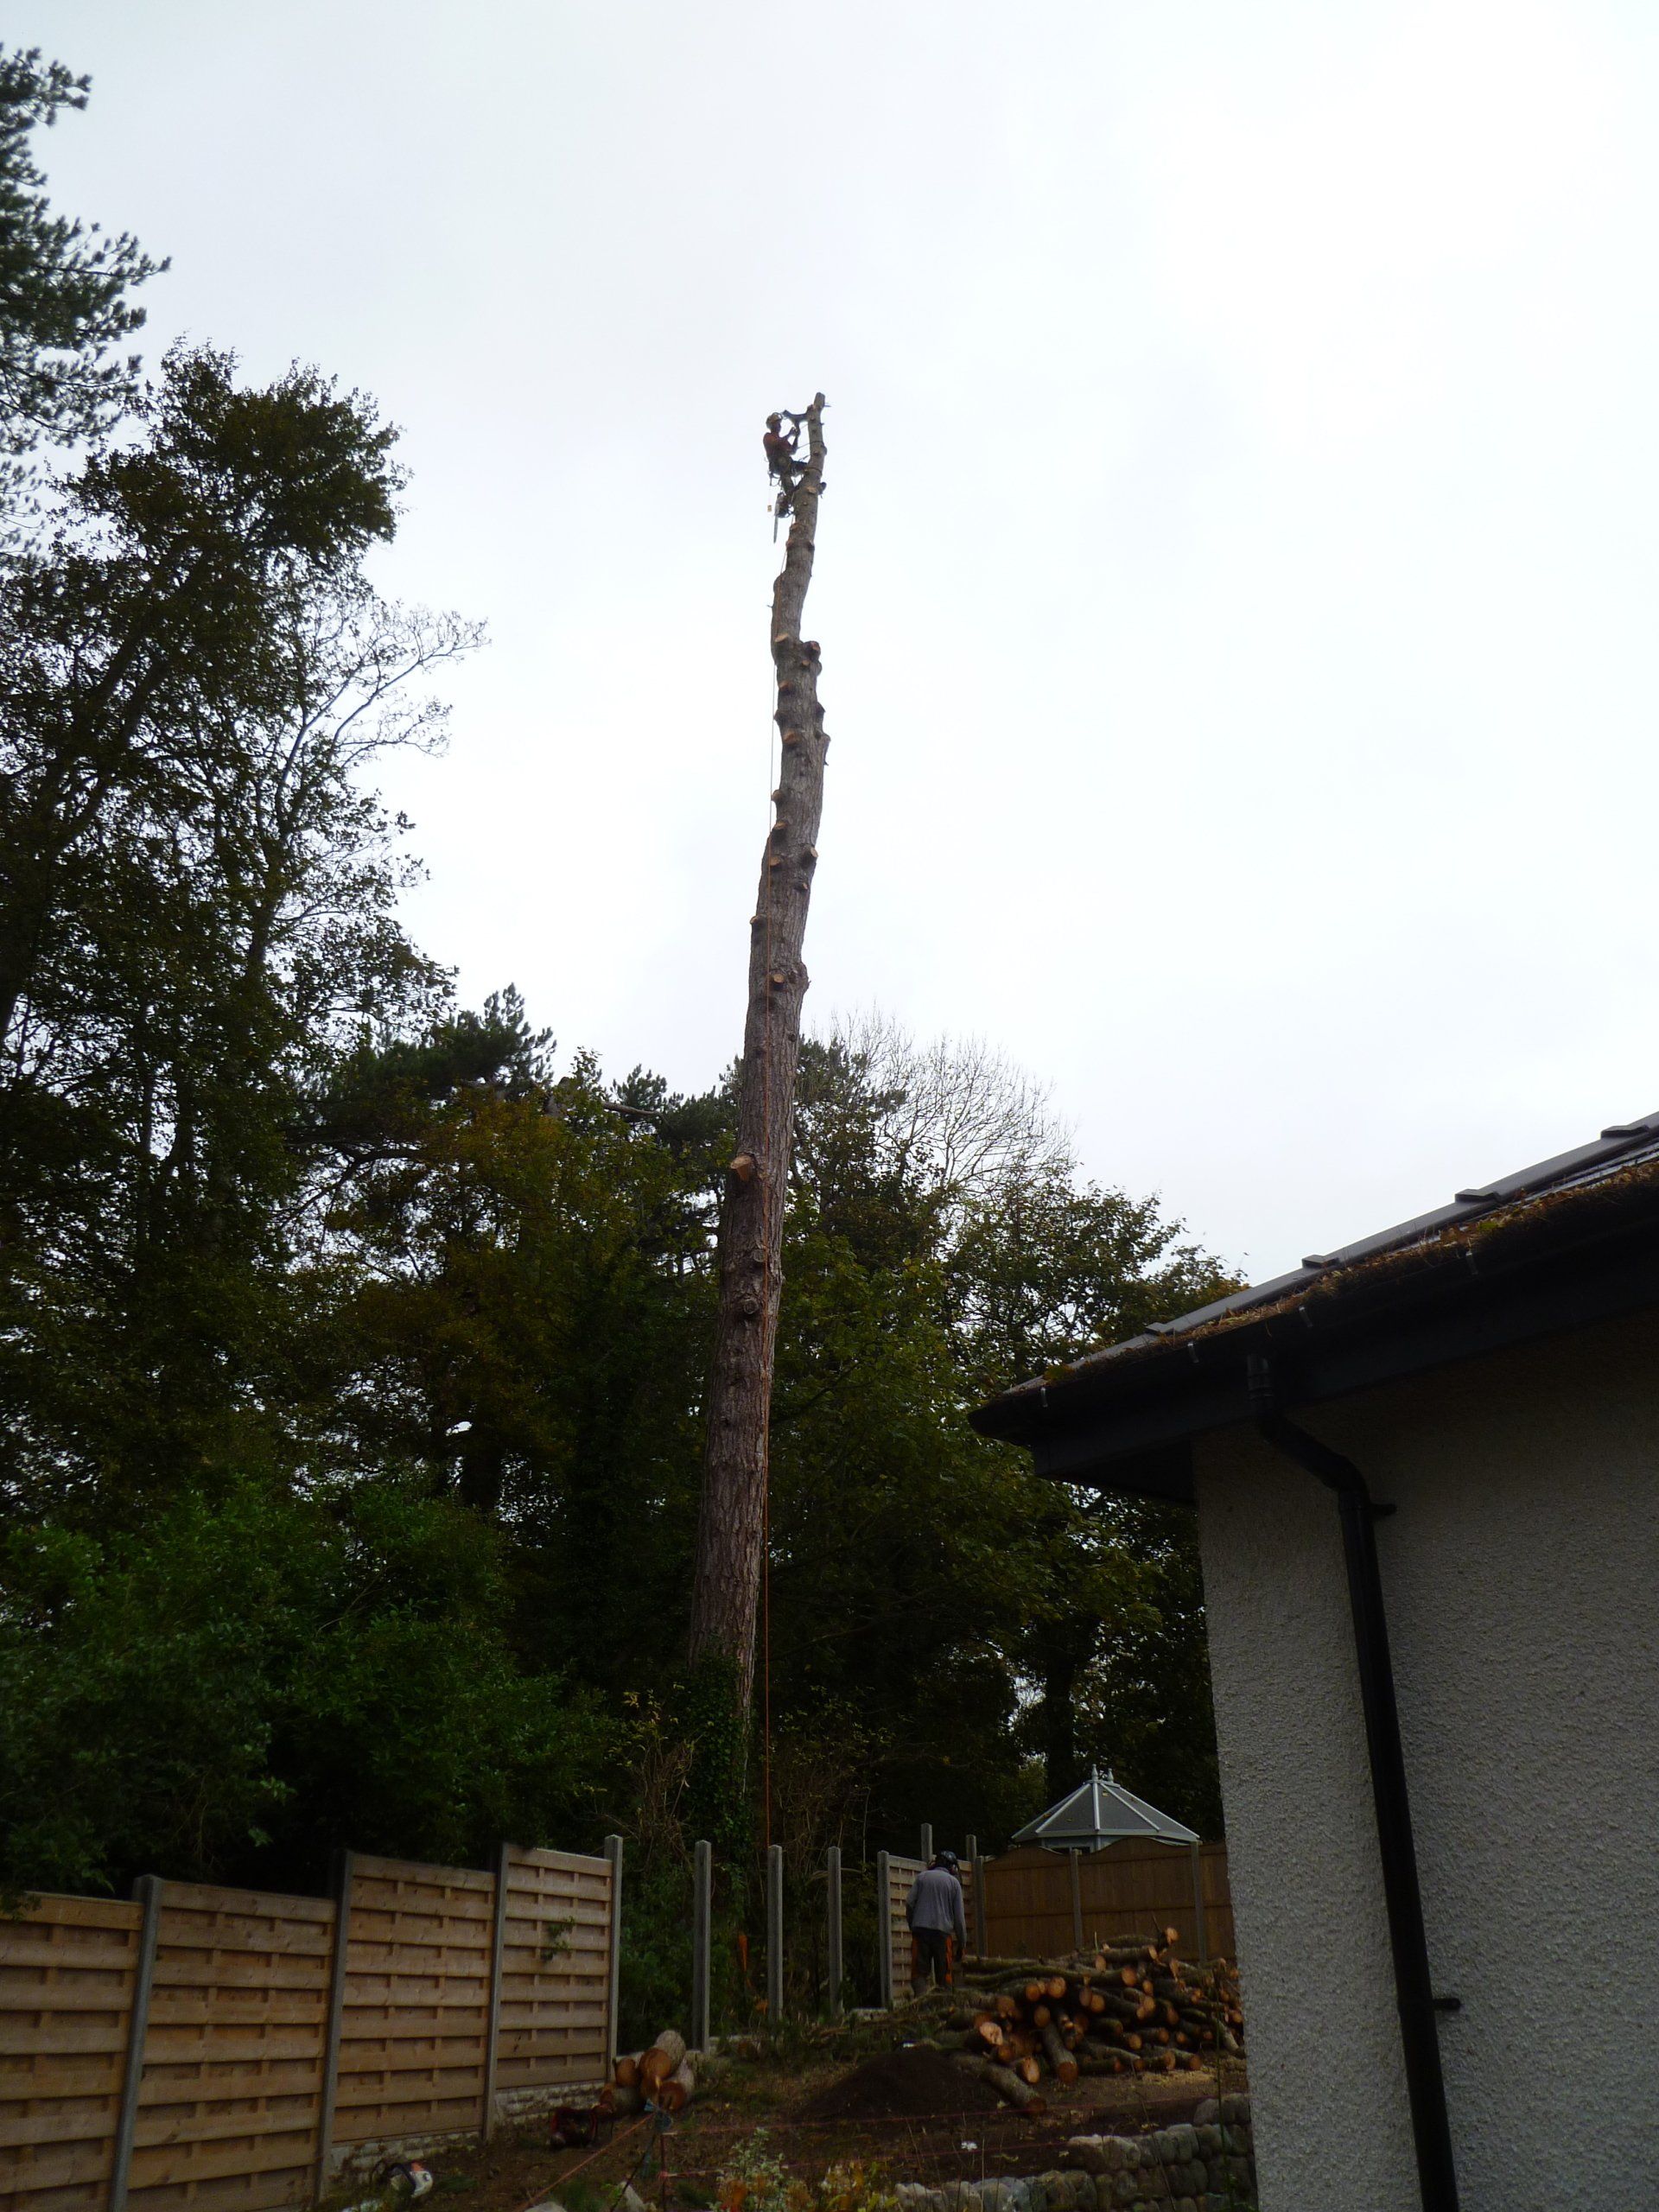 With the branches gone time to sectionally dismantle the tree trunk.